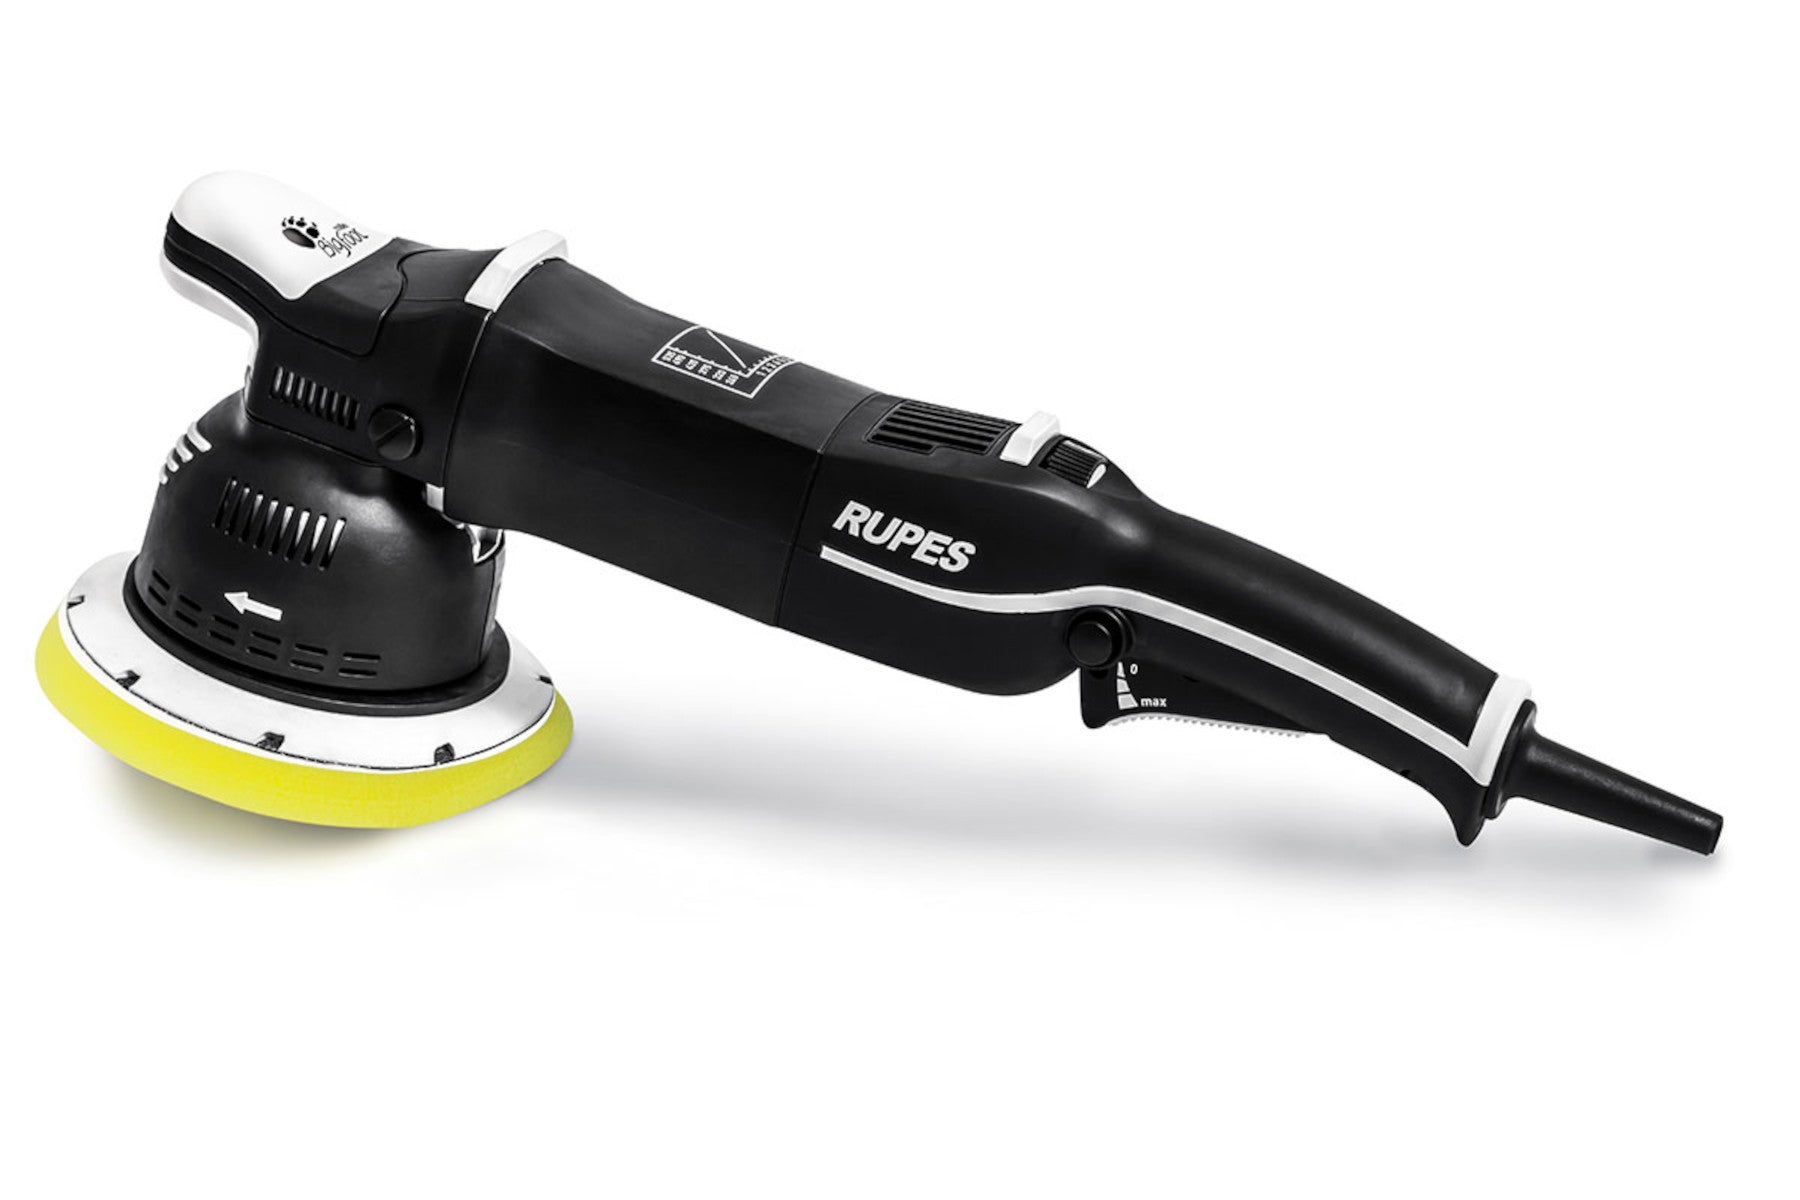 RUPES Gear Driven Dual Action Polisher – BIGFOOT Mille LK900E